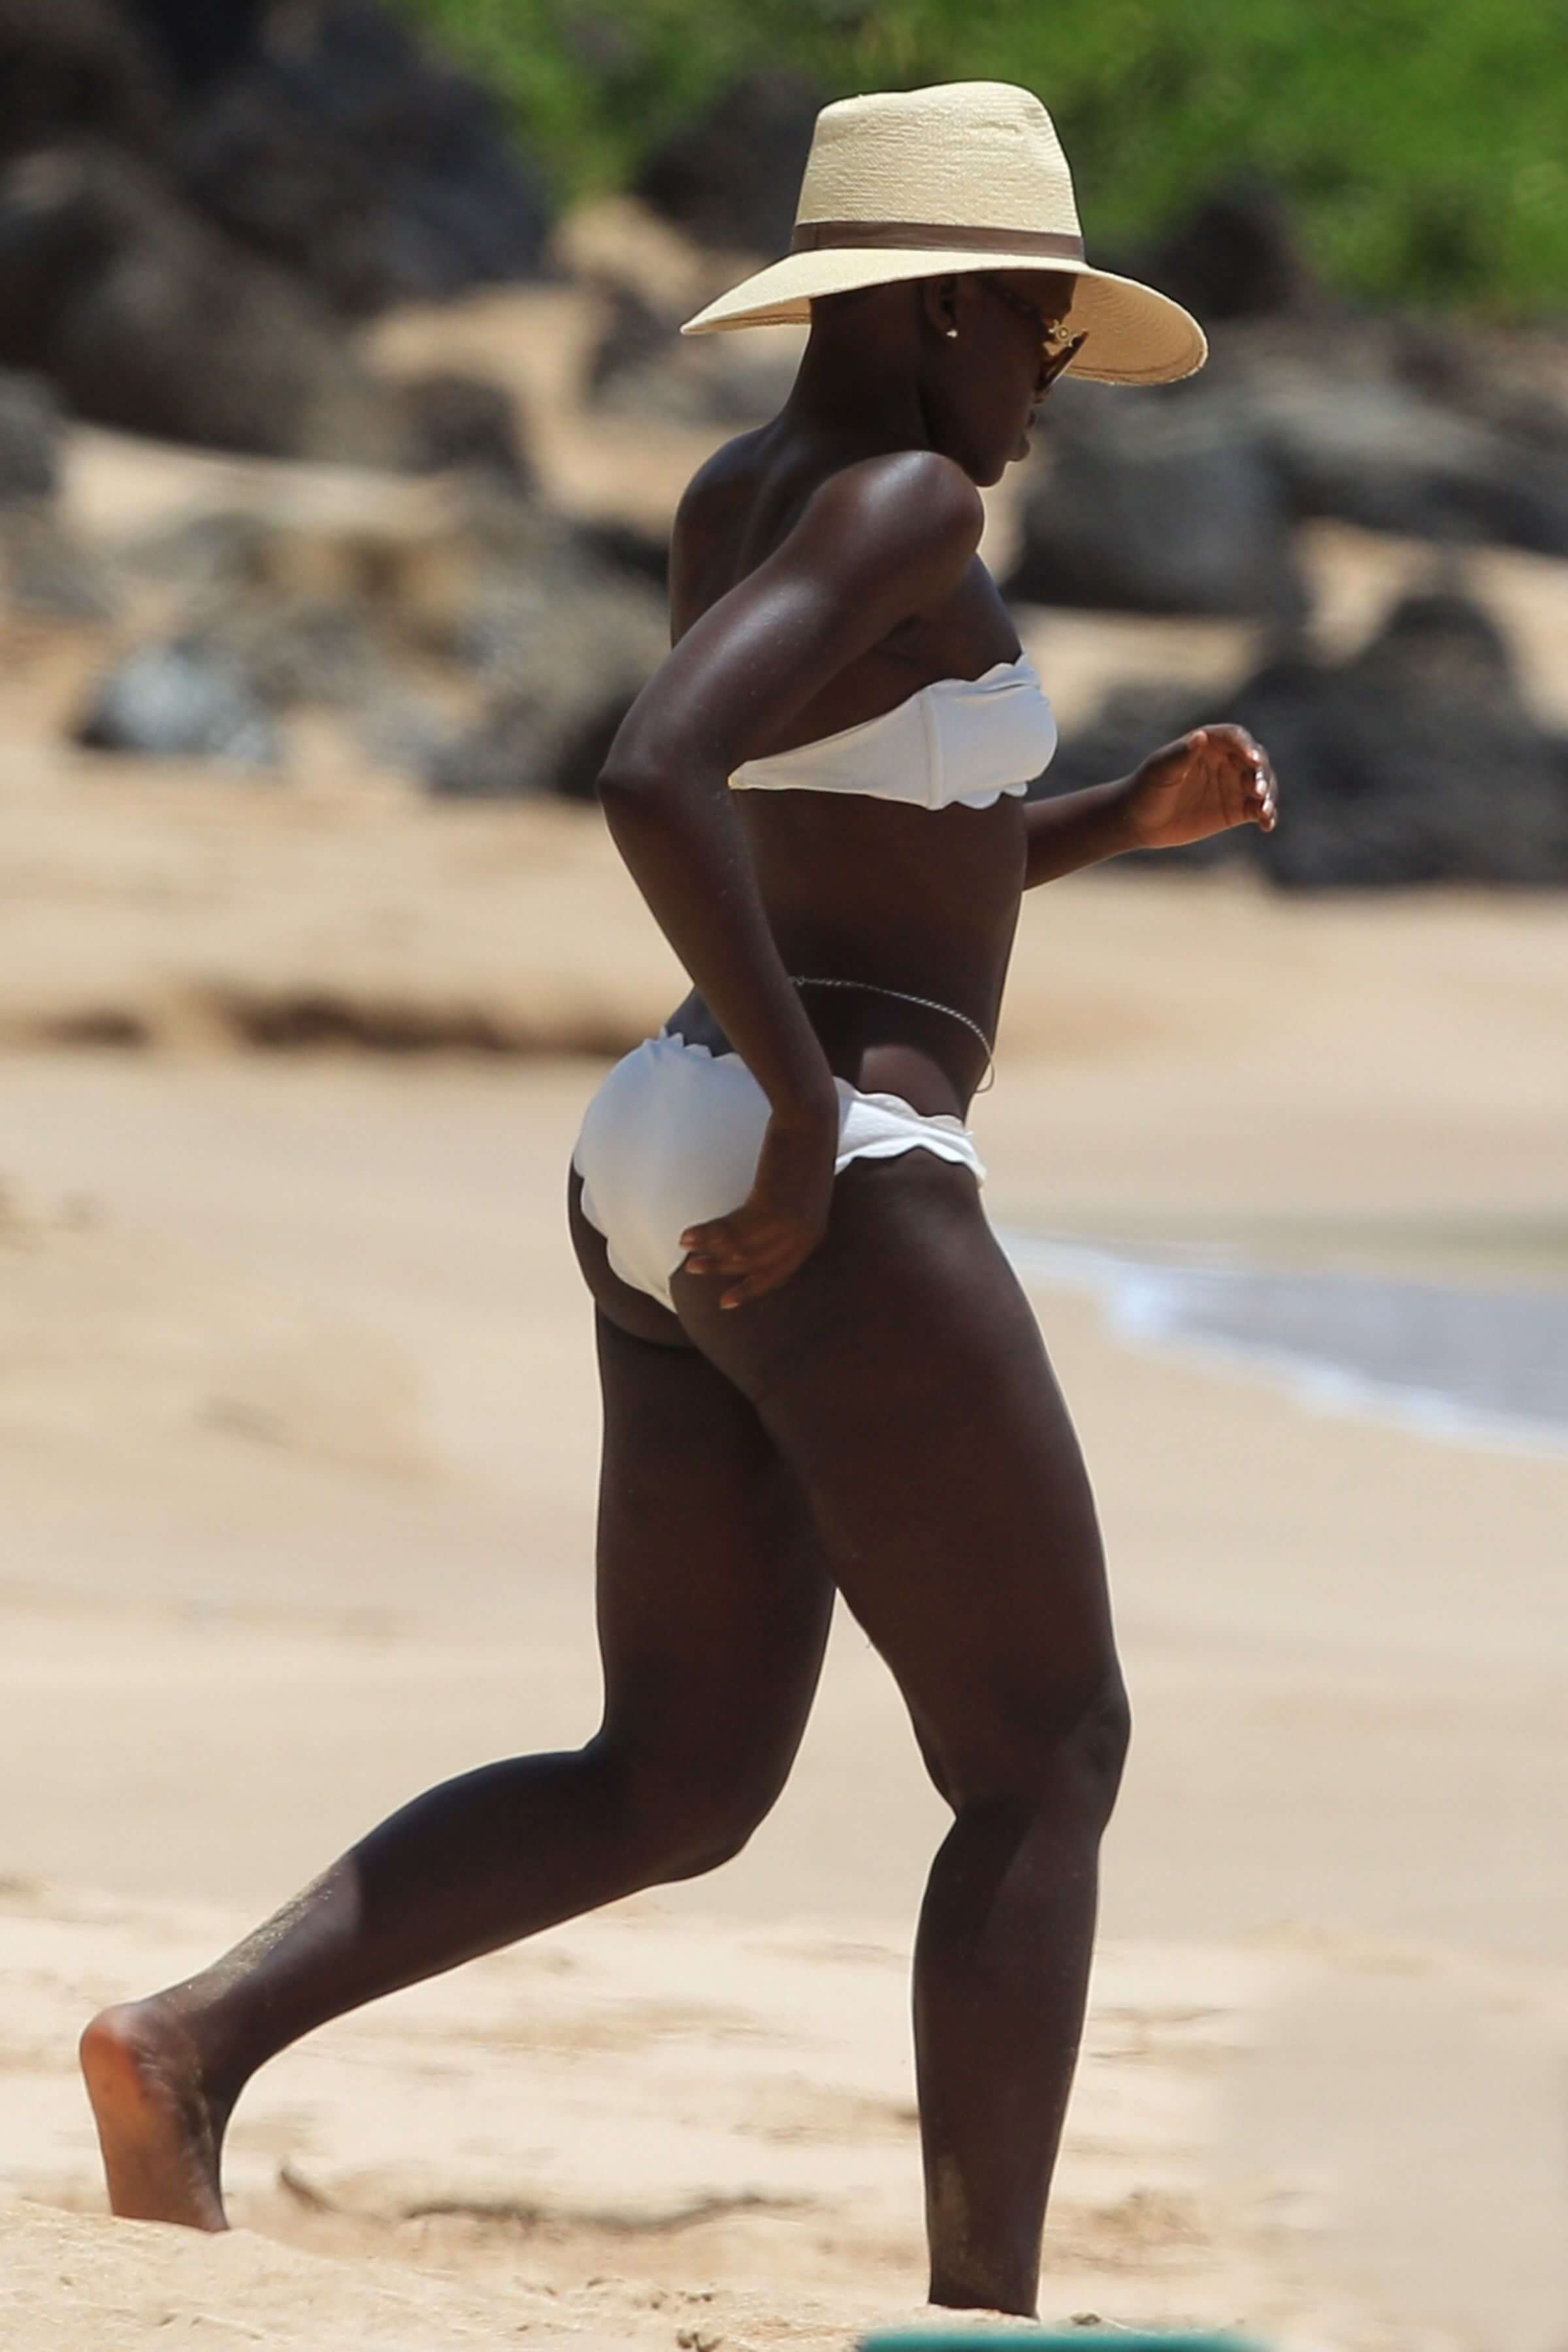 So, we have also gathered a few Lupita Nyong’o bikini and swimsuit featurin...